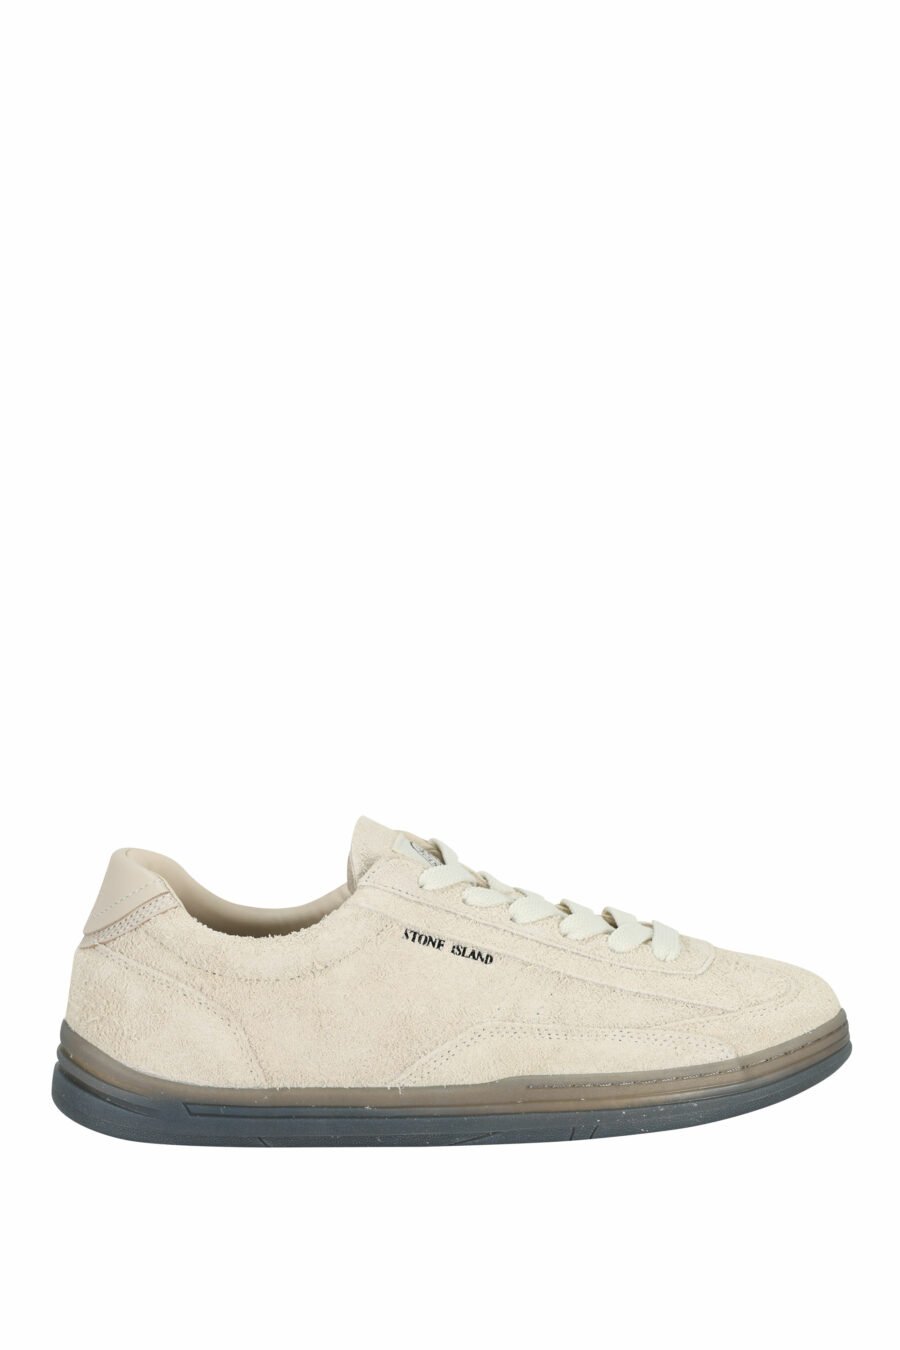 Beige trainers with minilogo and grey sole - 8052572915505